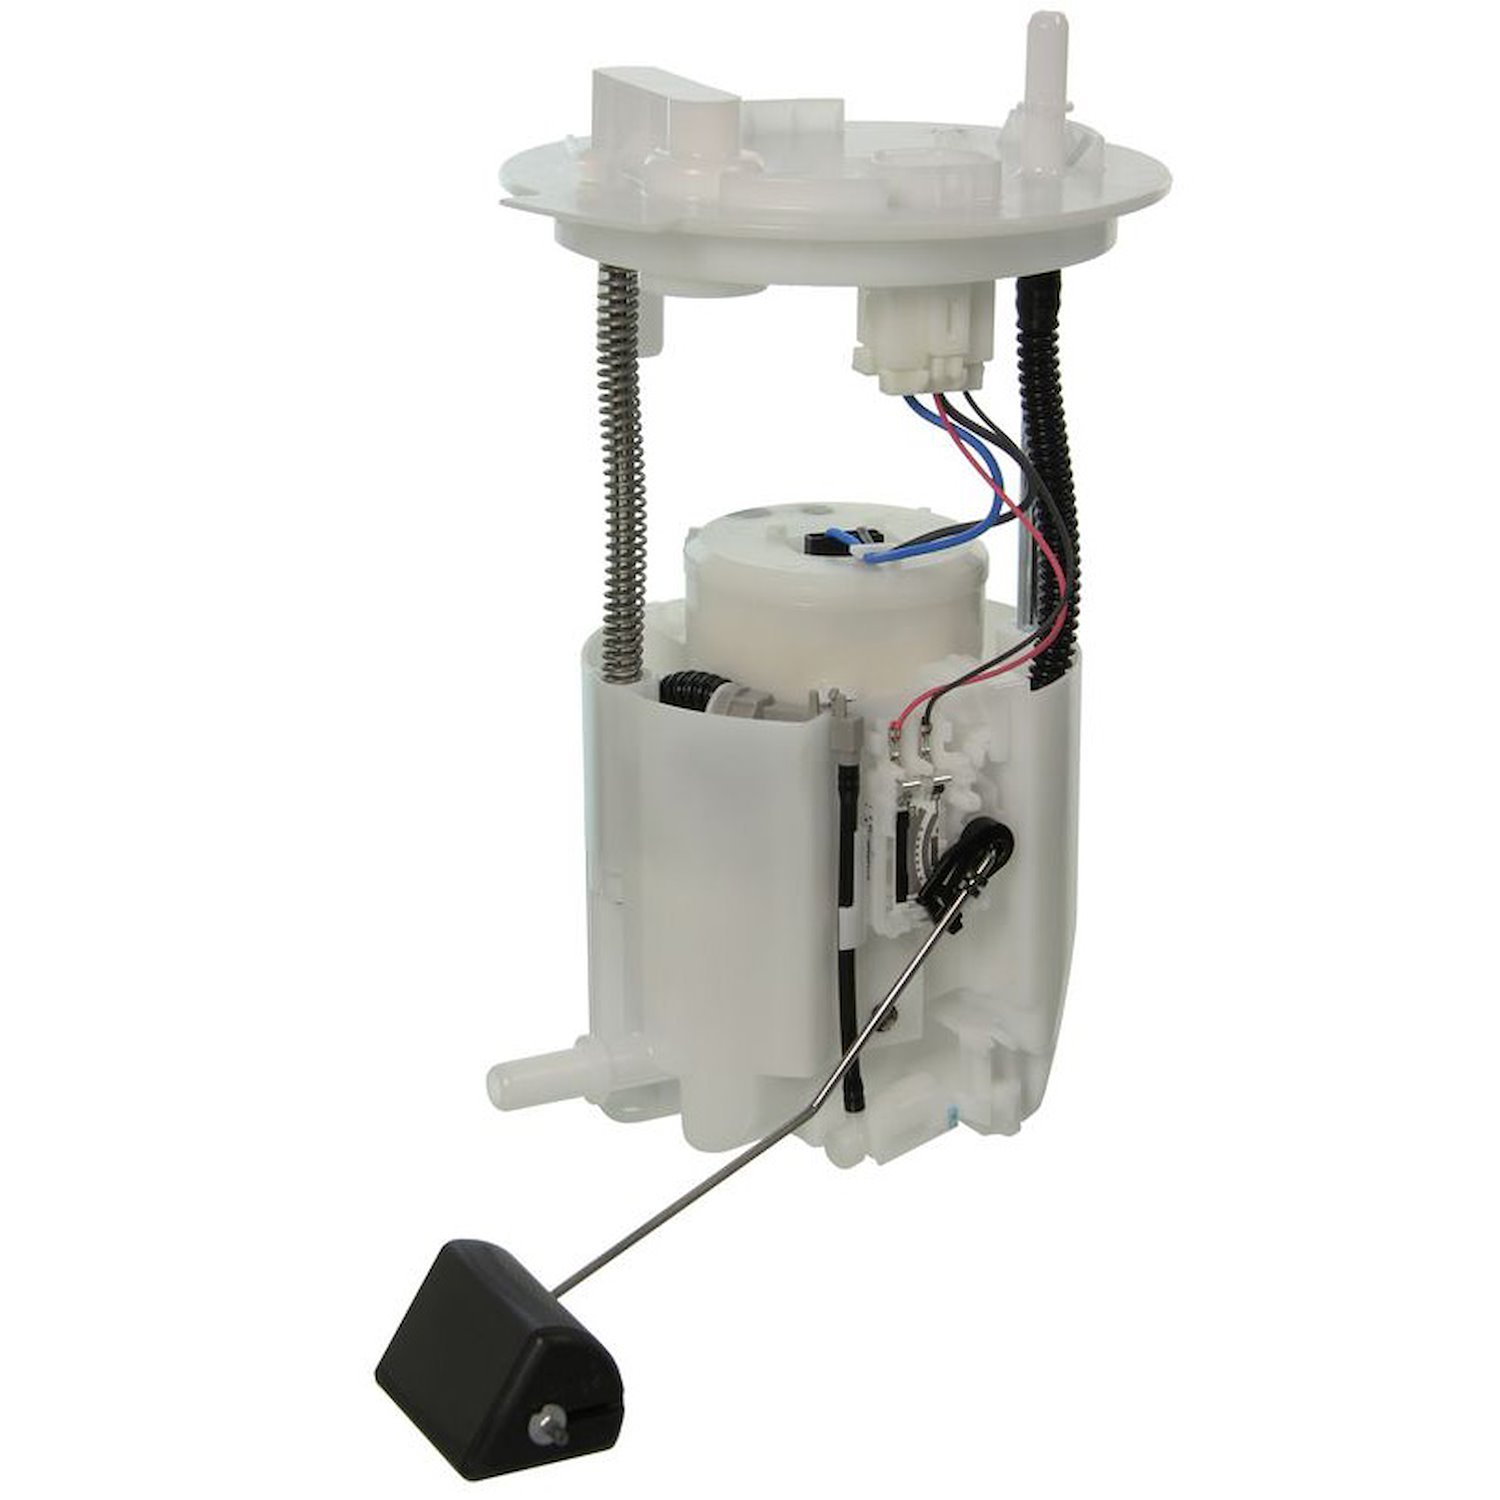 OE Ford/Merucry Replacement Fuel Pump Module Assembly for 2009-2011 Mercury Mariner/2009-2012 Ford Escape